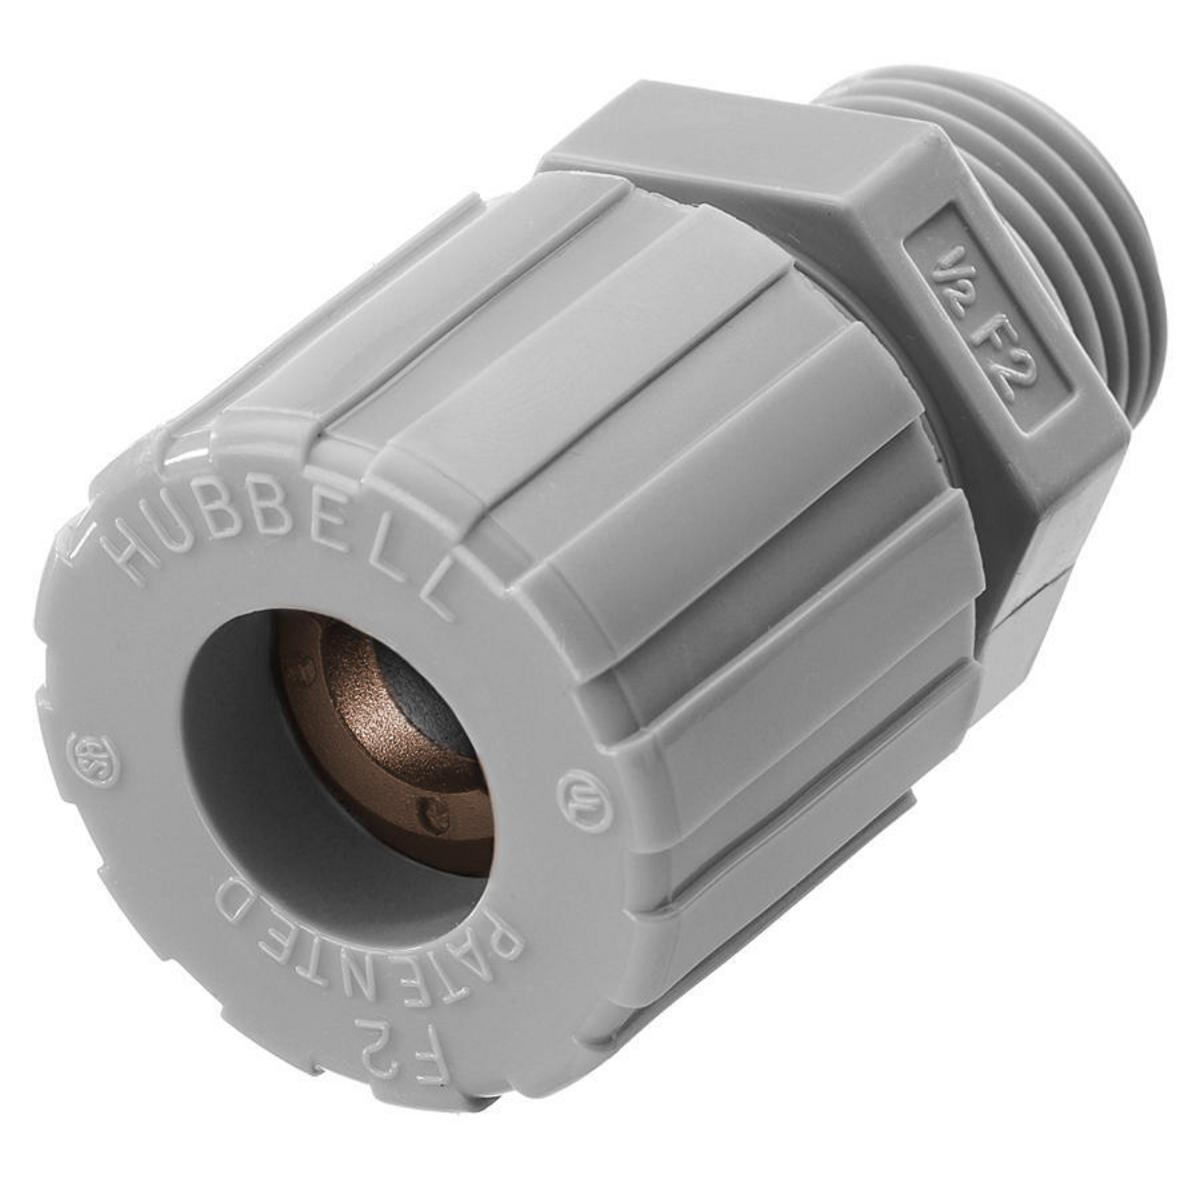 Hubbell SHC1040CR Kellems Wire Management, Cord Connectors, Straight Male, .50-.63", 1", Nylon  ; Nylon cord connector resists most common industrial corrosives ; Provides effective pullout protection ; Lightweight design ; Standard Product